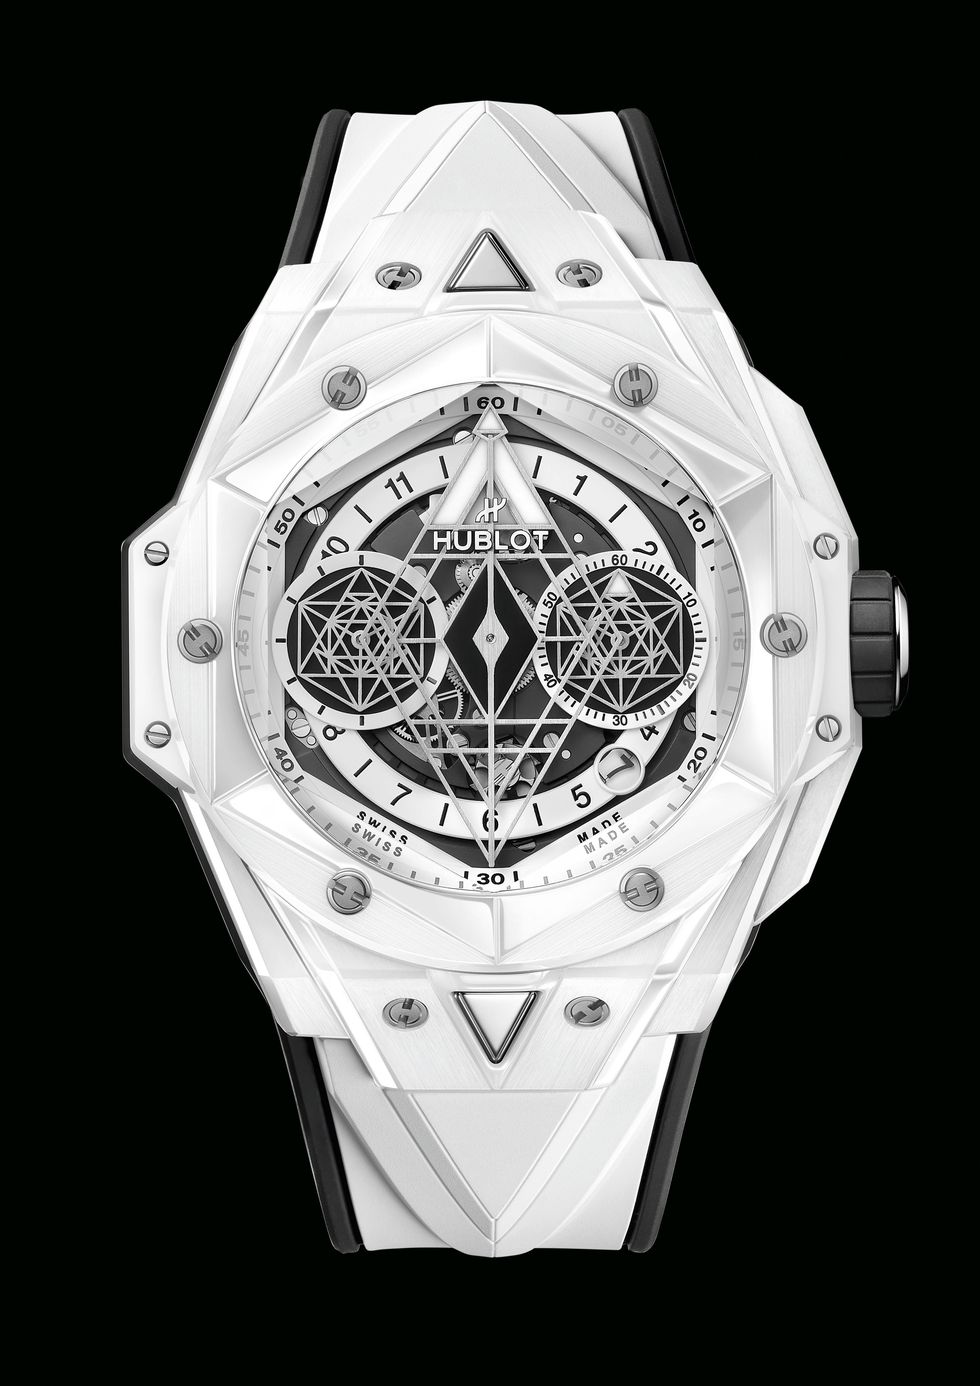 Hublot Perfect-making an strive Launched Photographs of a Gorgeous Contemporary Test up on Made Out of Pure Sapphire